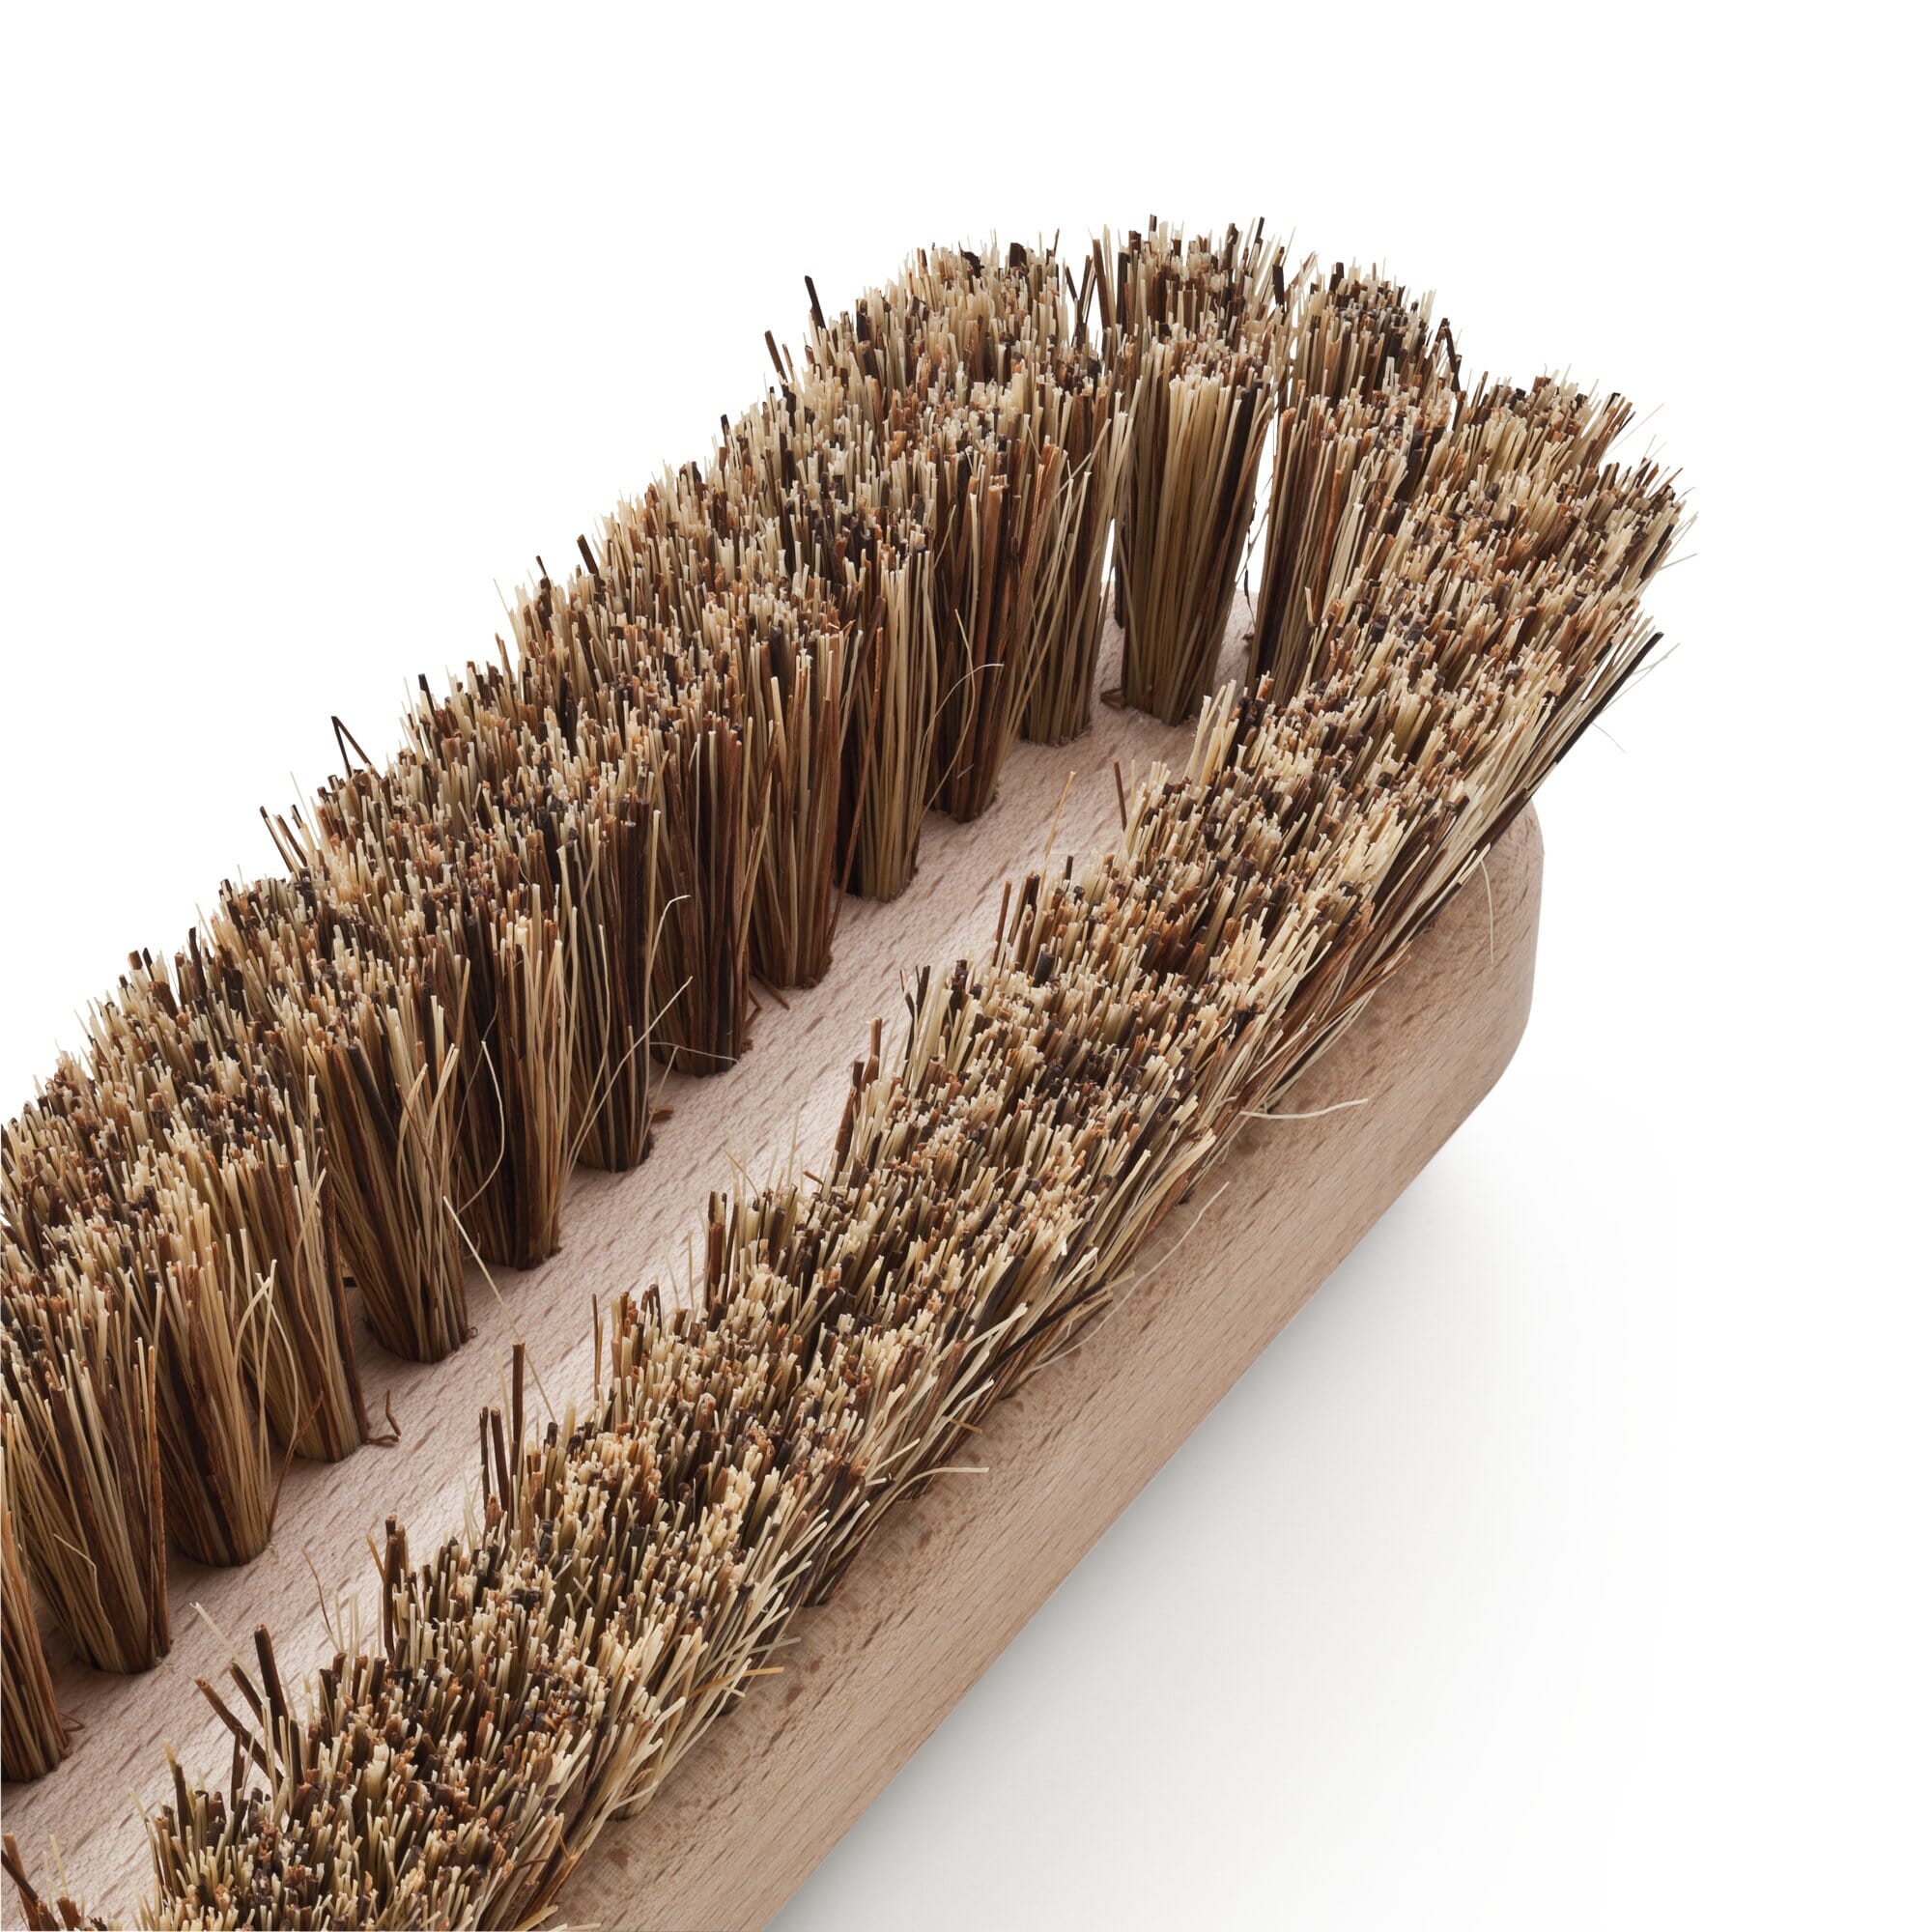 Dustpan and Brush Set- Hand Broom with Swiss Natural Horsehair Bristles.